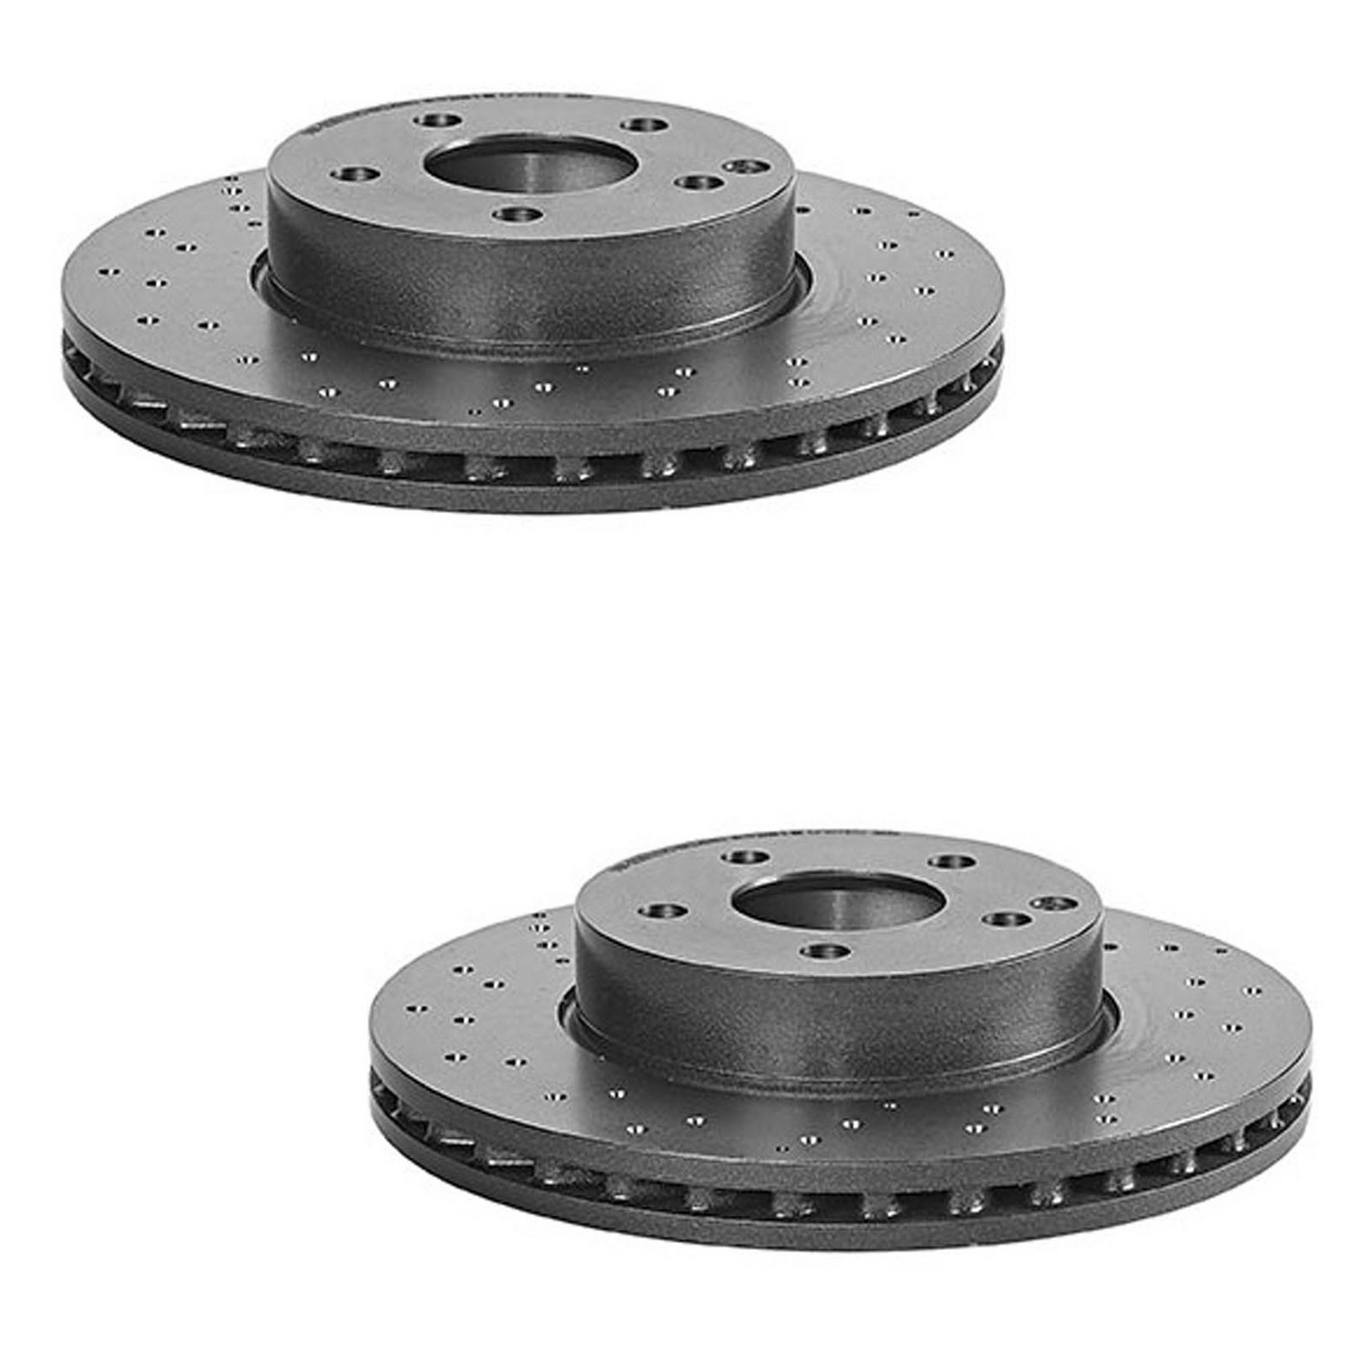 Mercedes Brakes Kit - Pads & Rotors Front and Rear (295mm/300mm) (Ceramic) 2044231512 - Brembo 3089357KIT